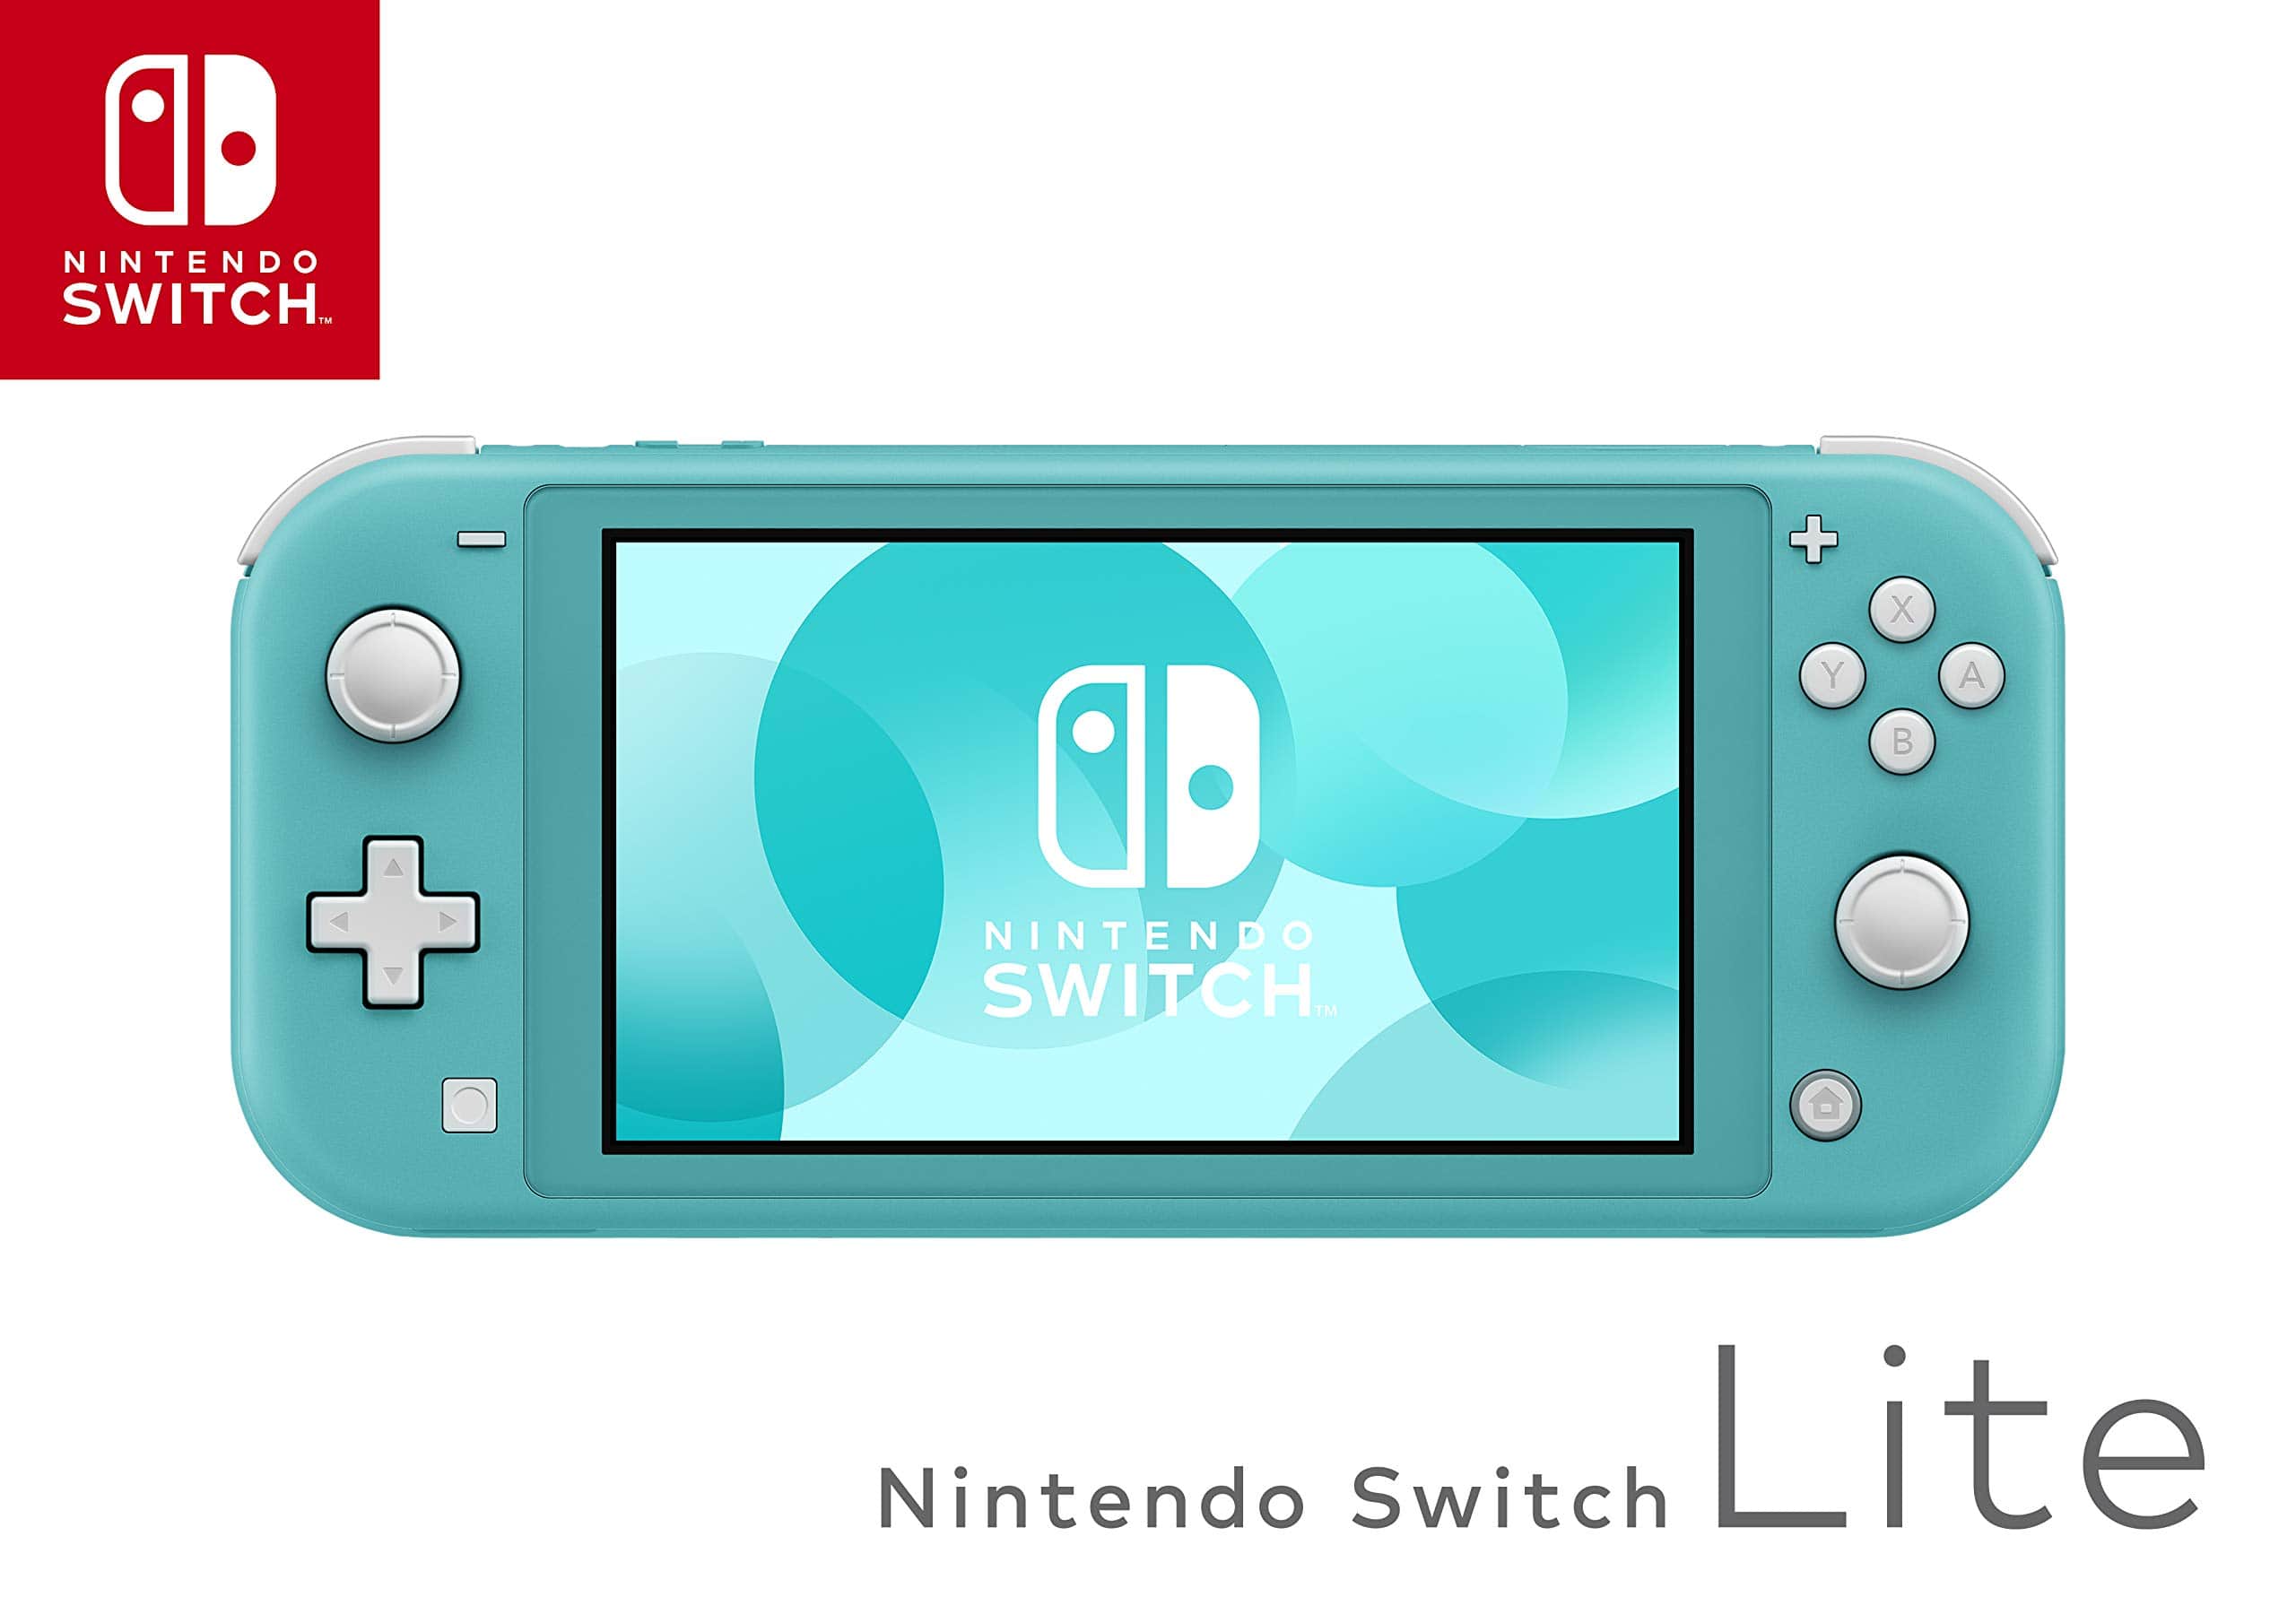 Nintendo Switch Lite in various colors, ideal for portable gaming and family entertainment